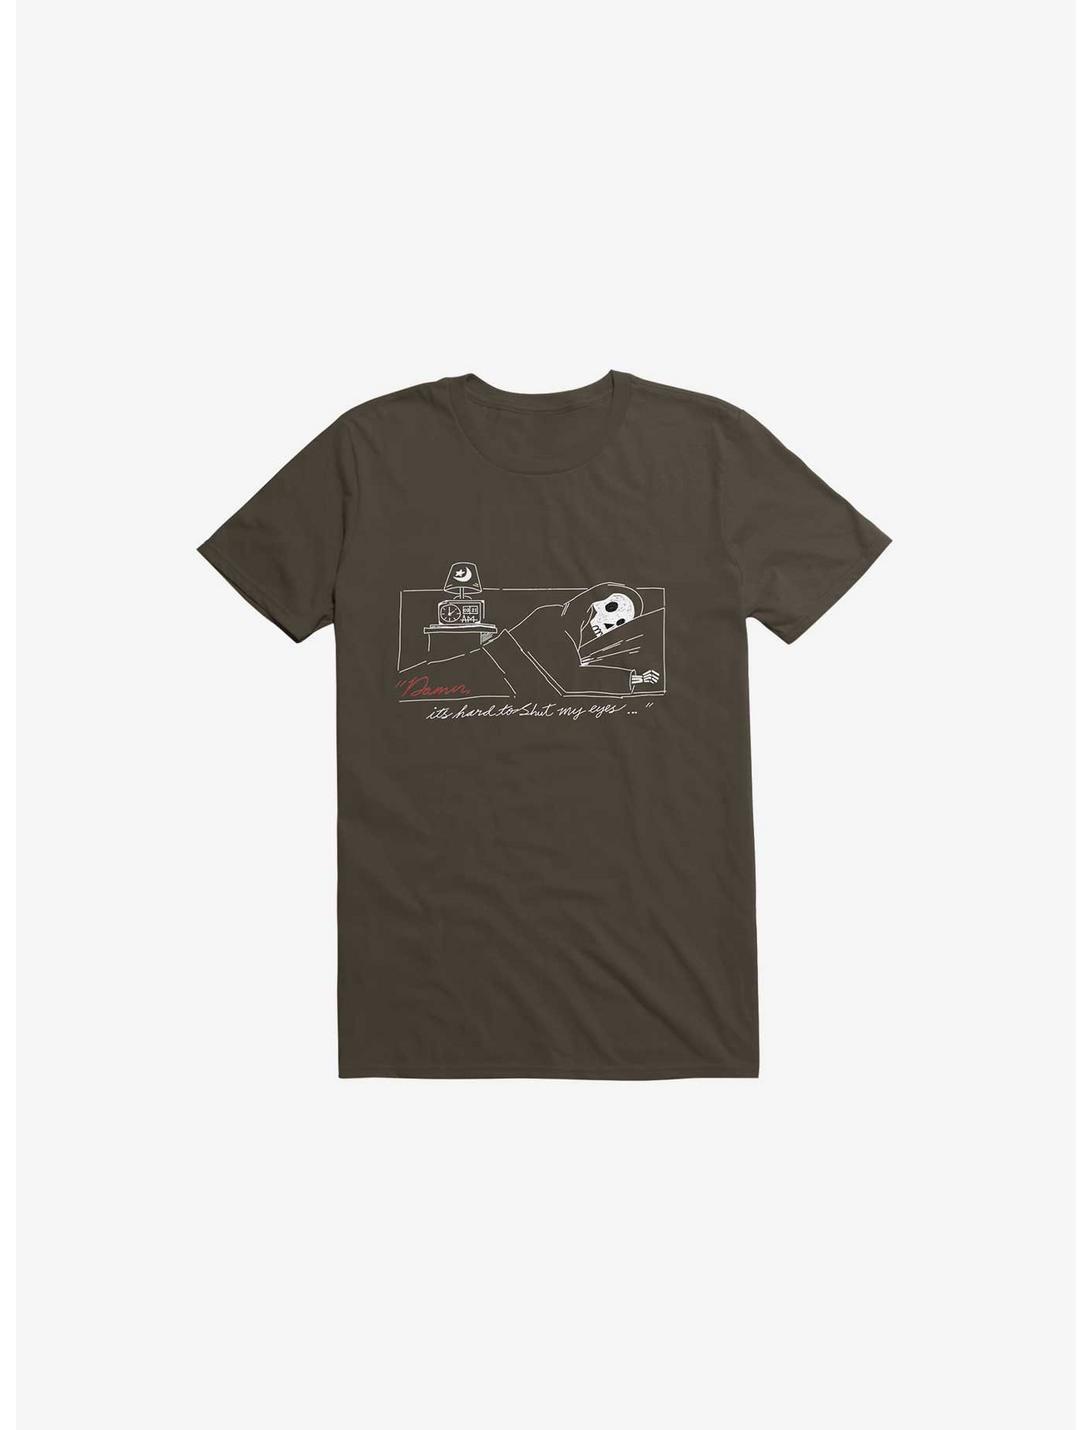 Damn, Sleepy Time Is Out T-Shirt, BROWN, hi-res